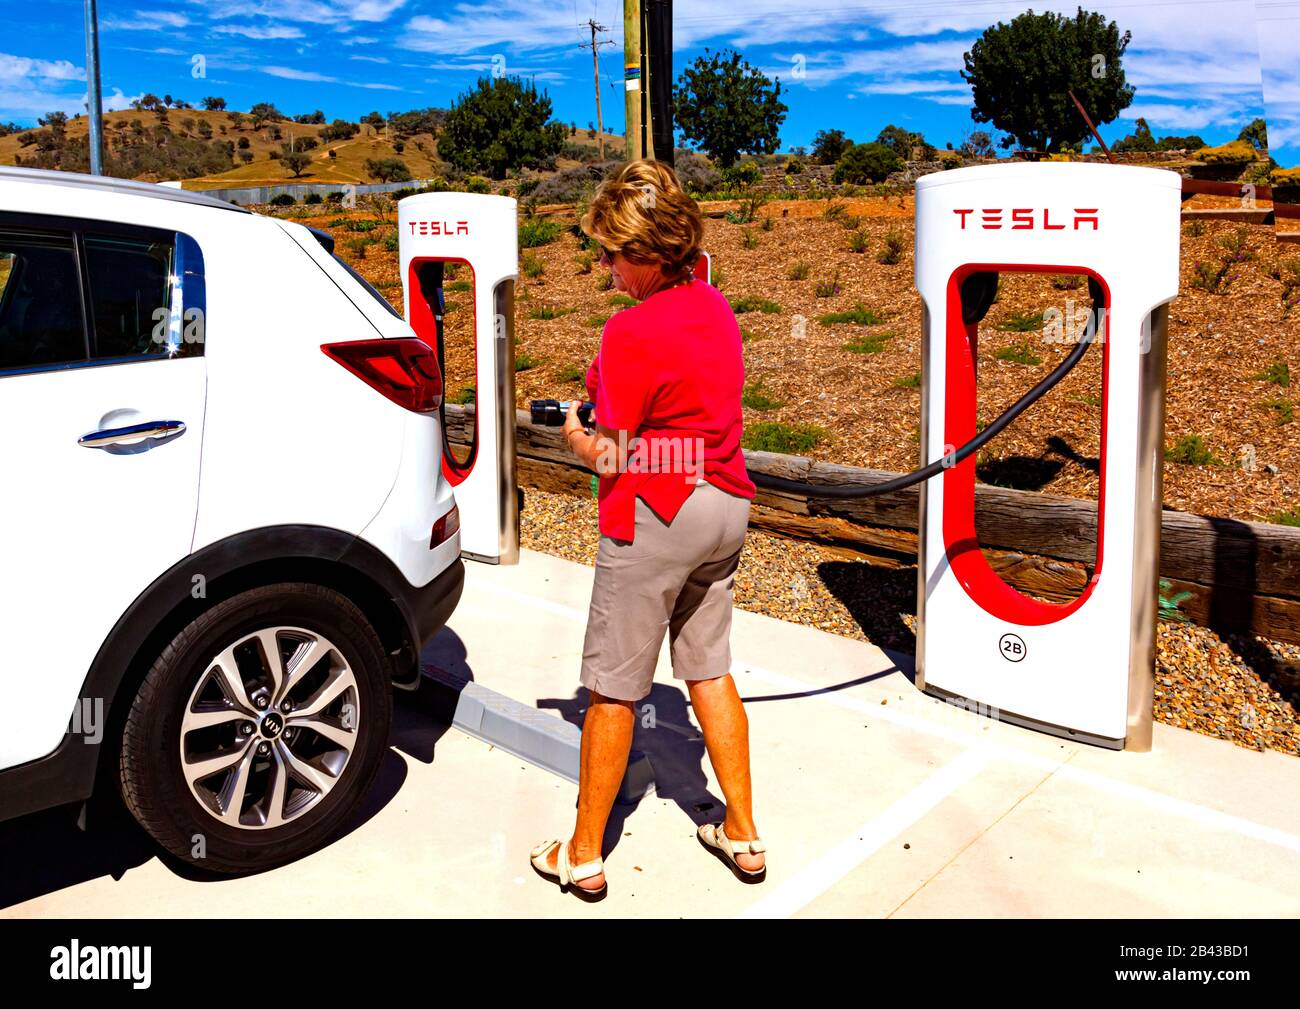 Female tourist preparing to charge her car at Tesla charging station near Gundagai on Hume Highway in Australian state of New South Wales Stock Photo